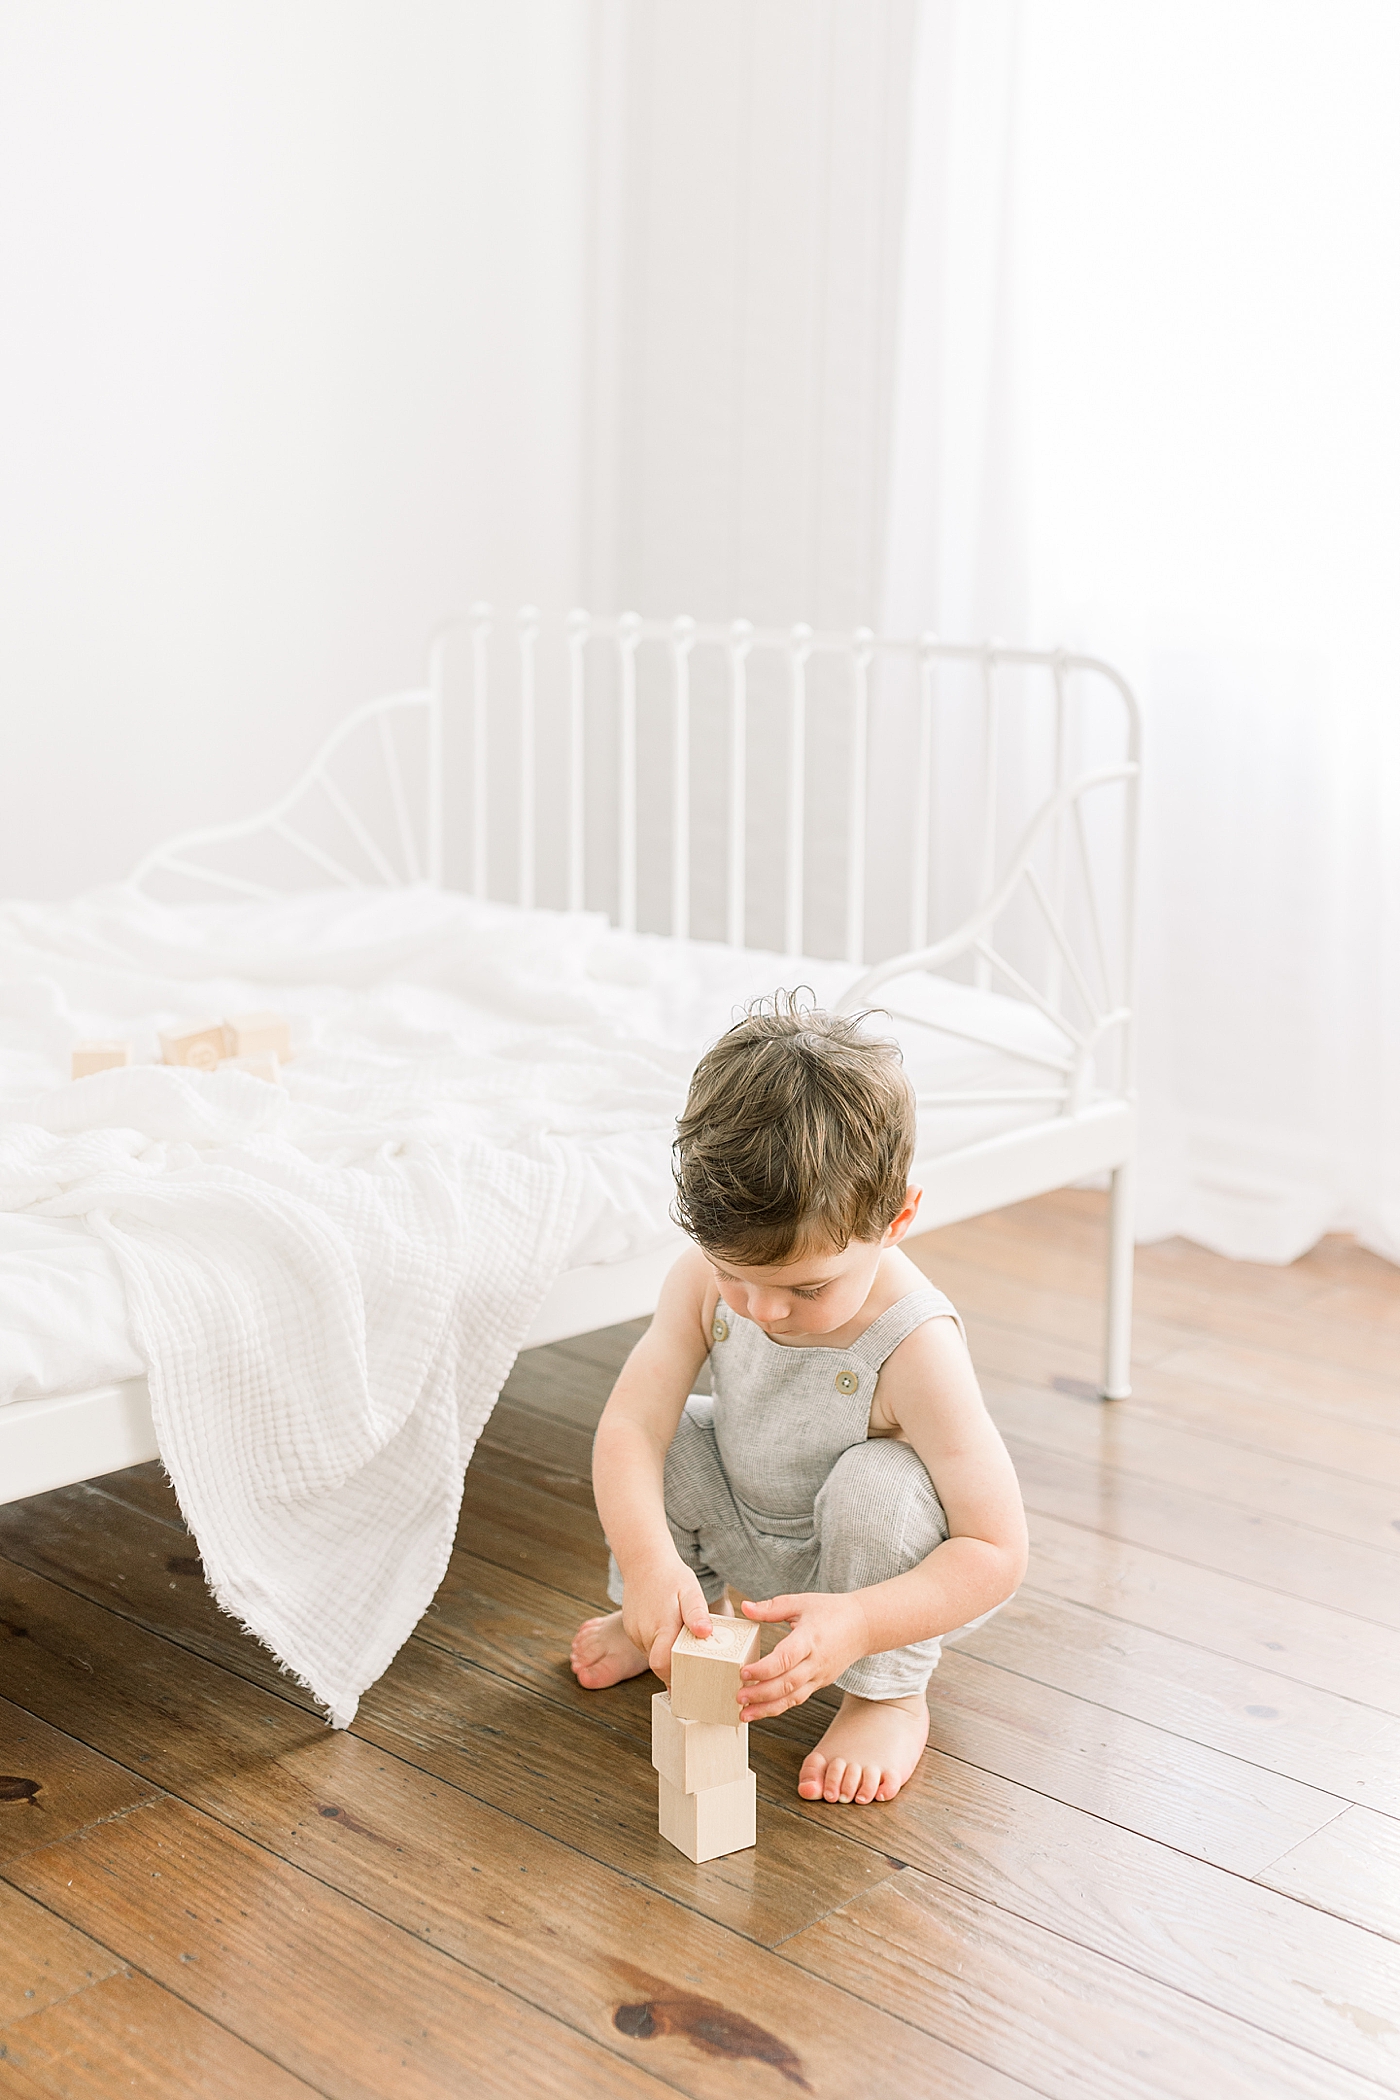 Little boy playing with wooden blocks | Image by Caitlyn Motycka